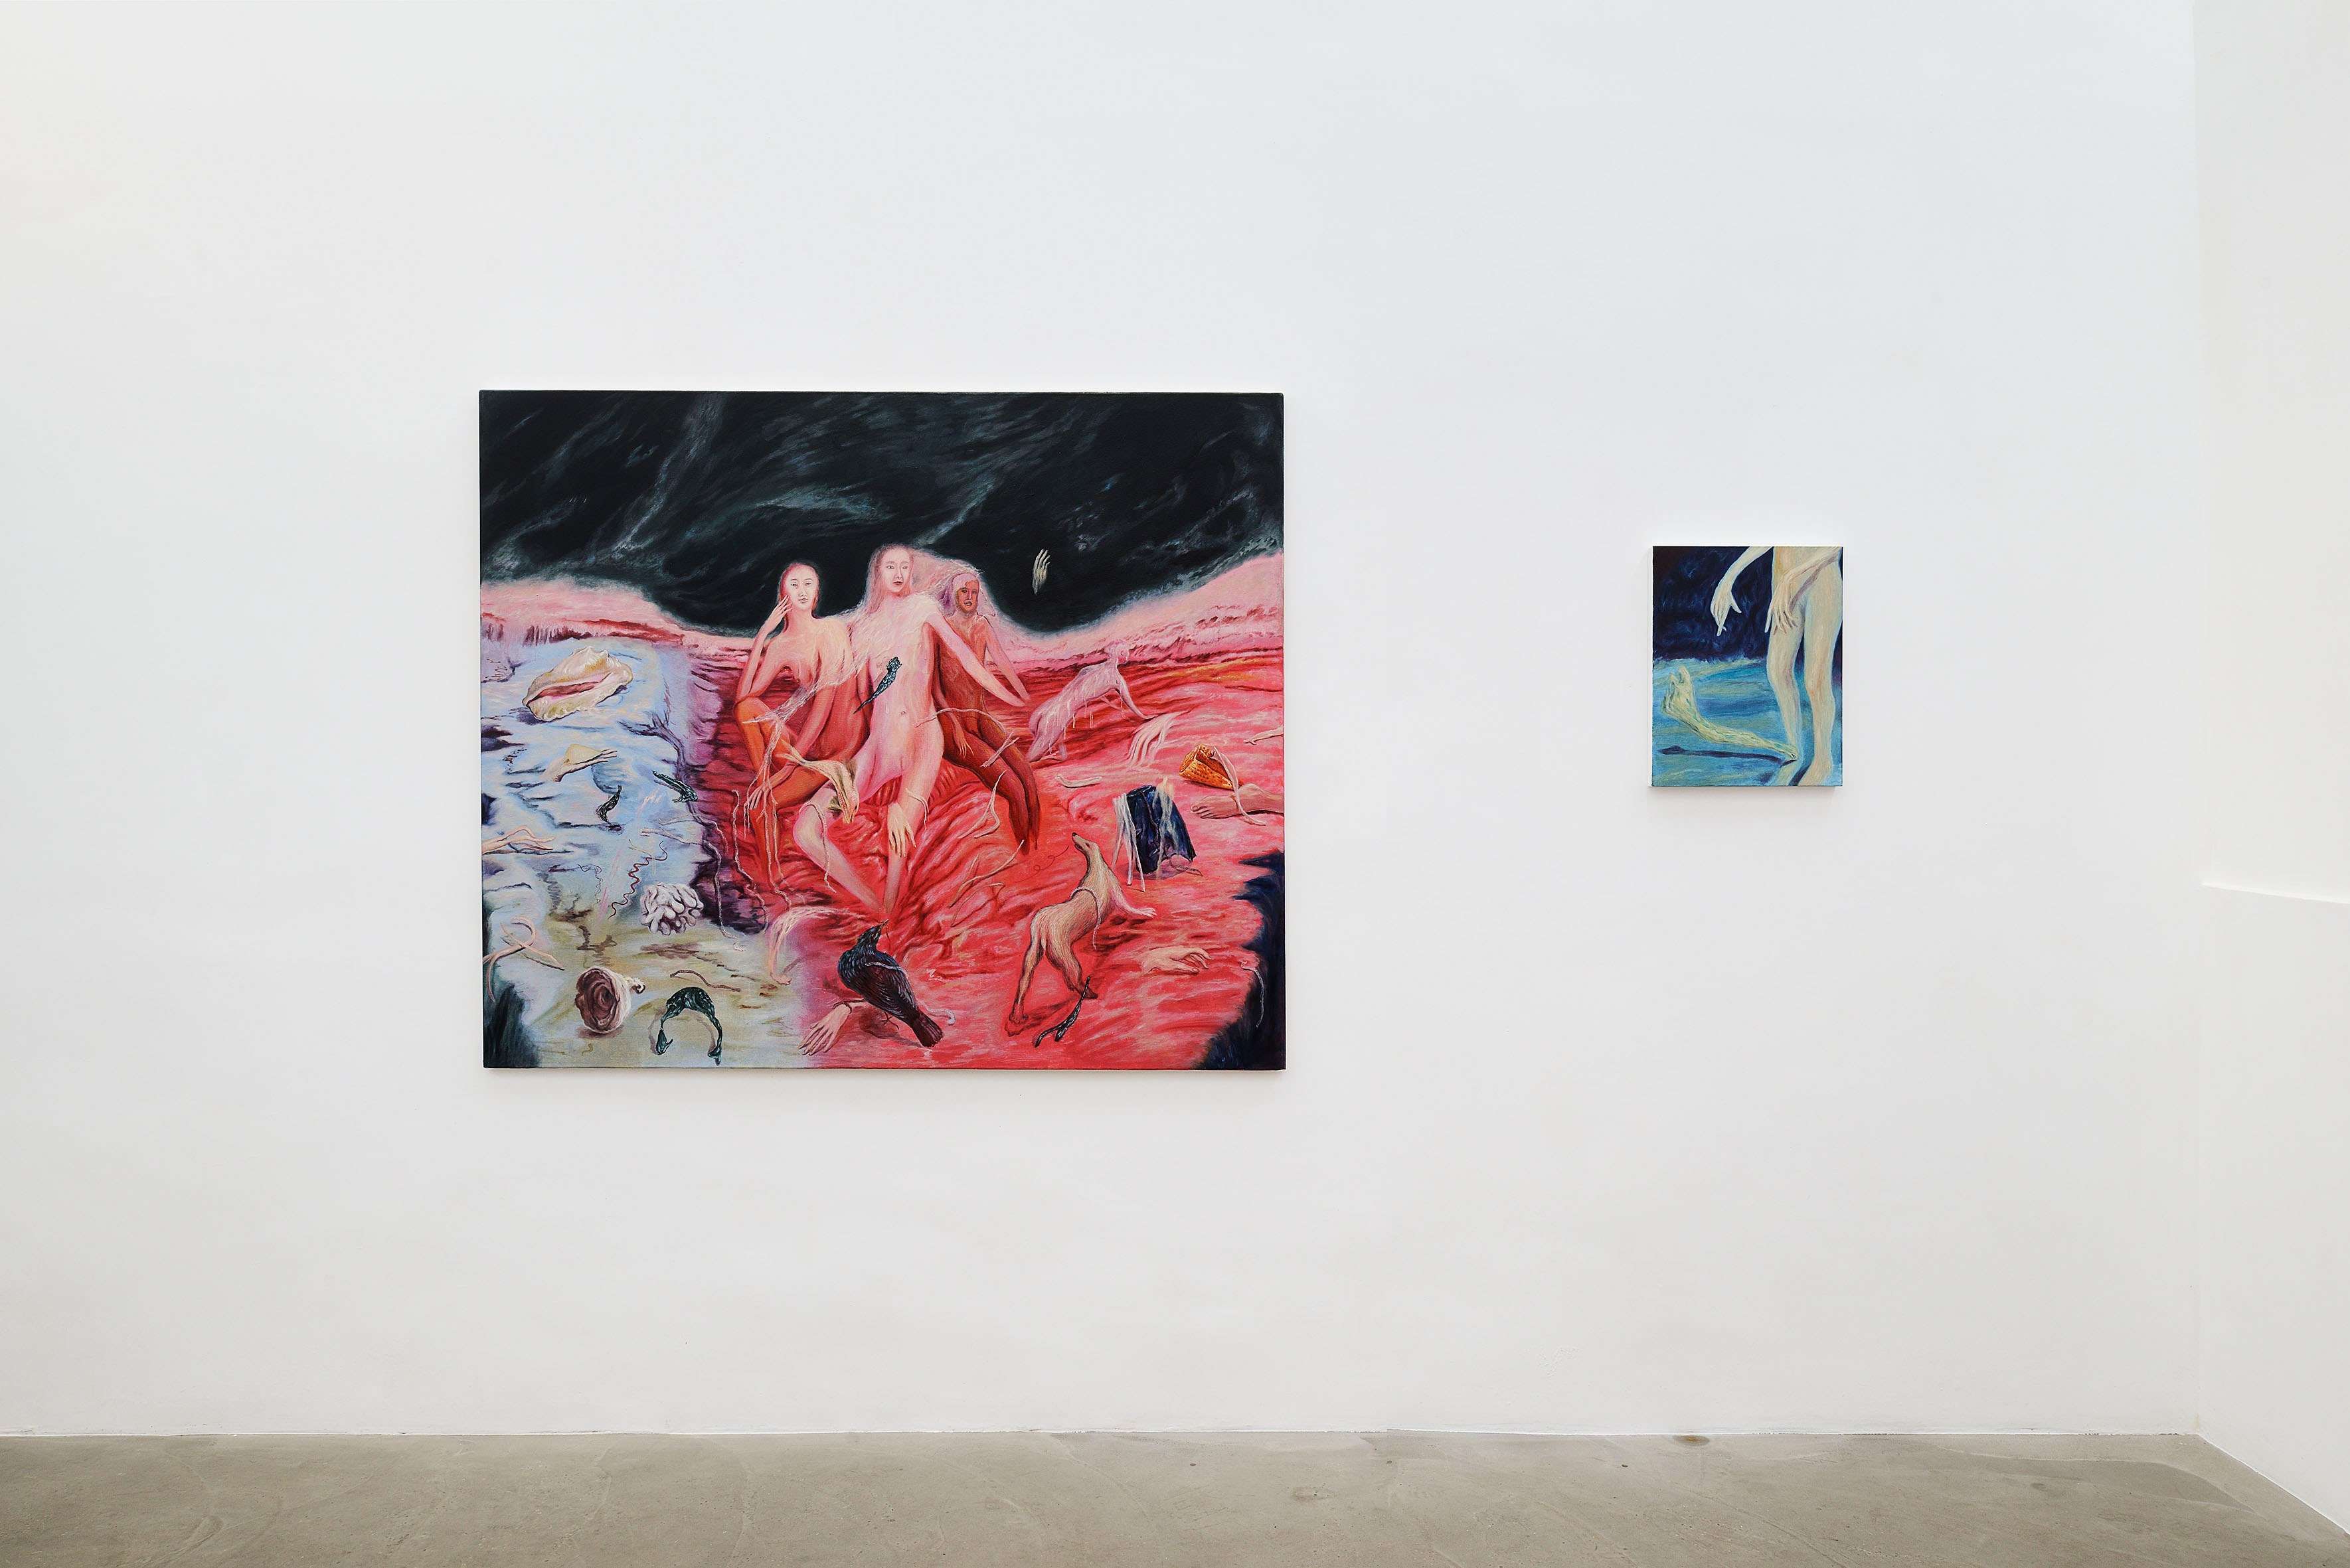 Francesca Banchelli, Fire Song, 2023, installation view at ADA, Rome